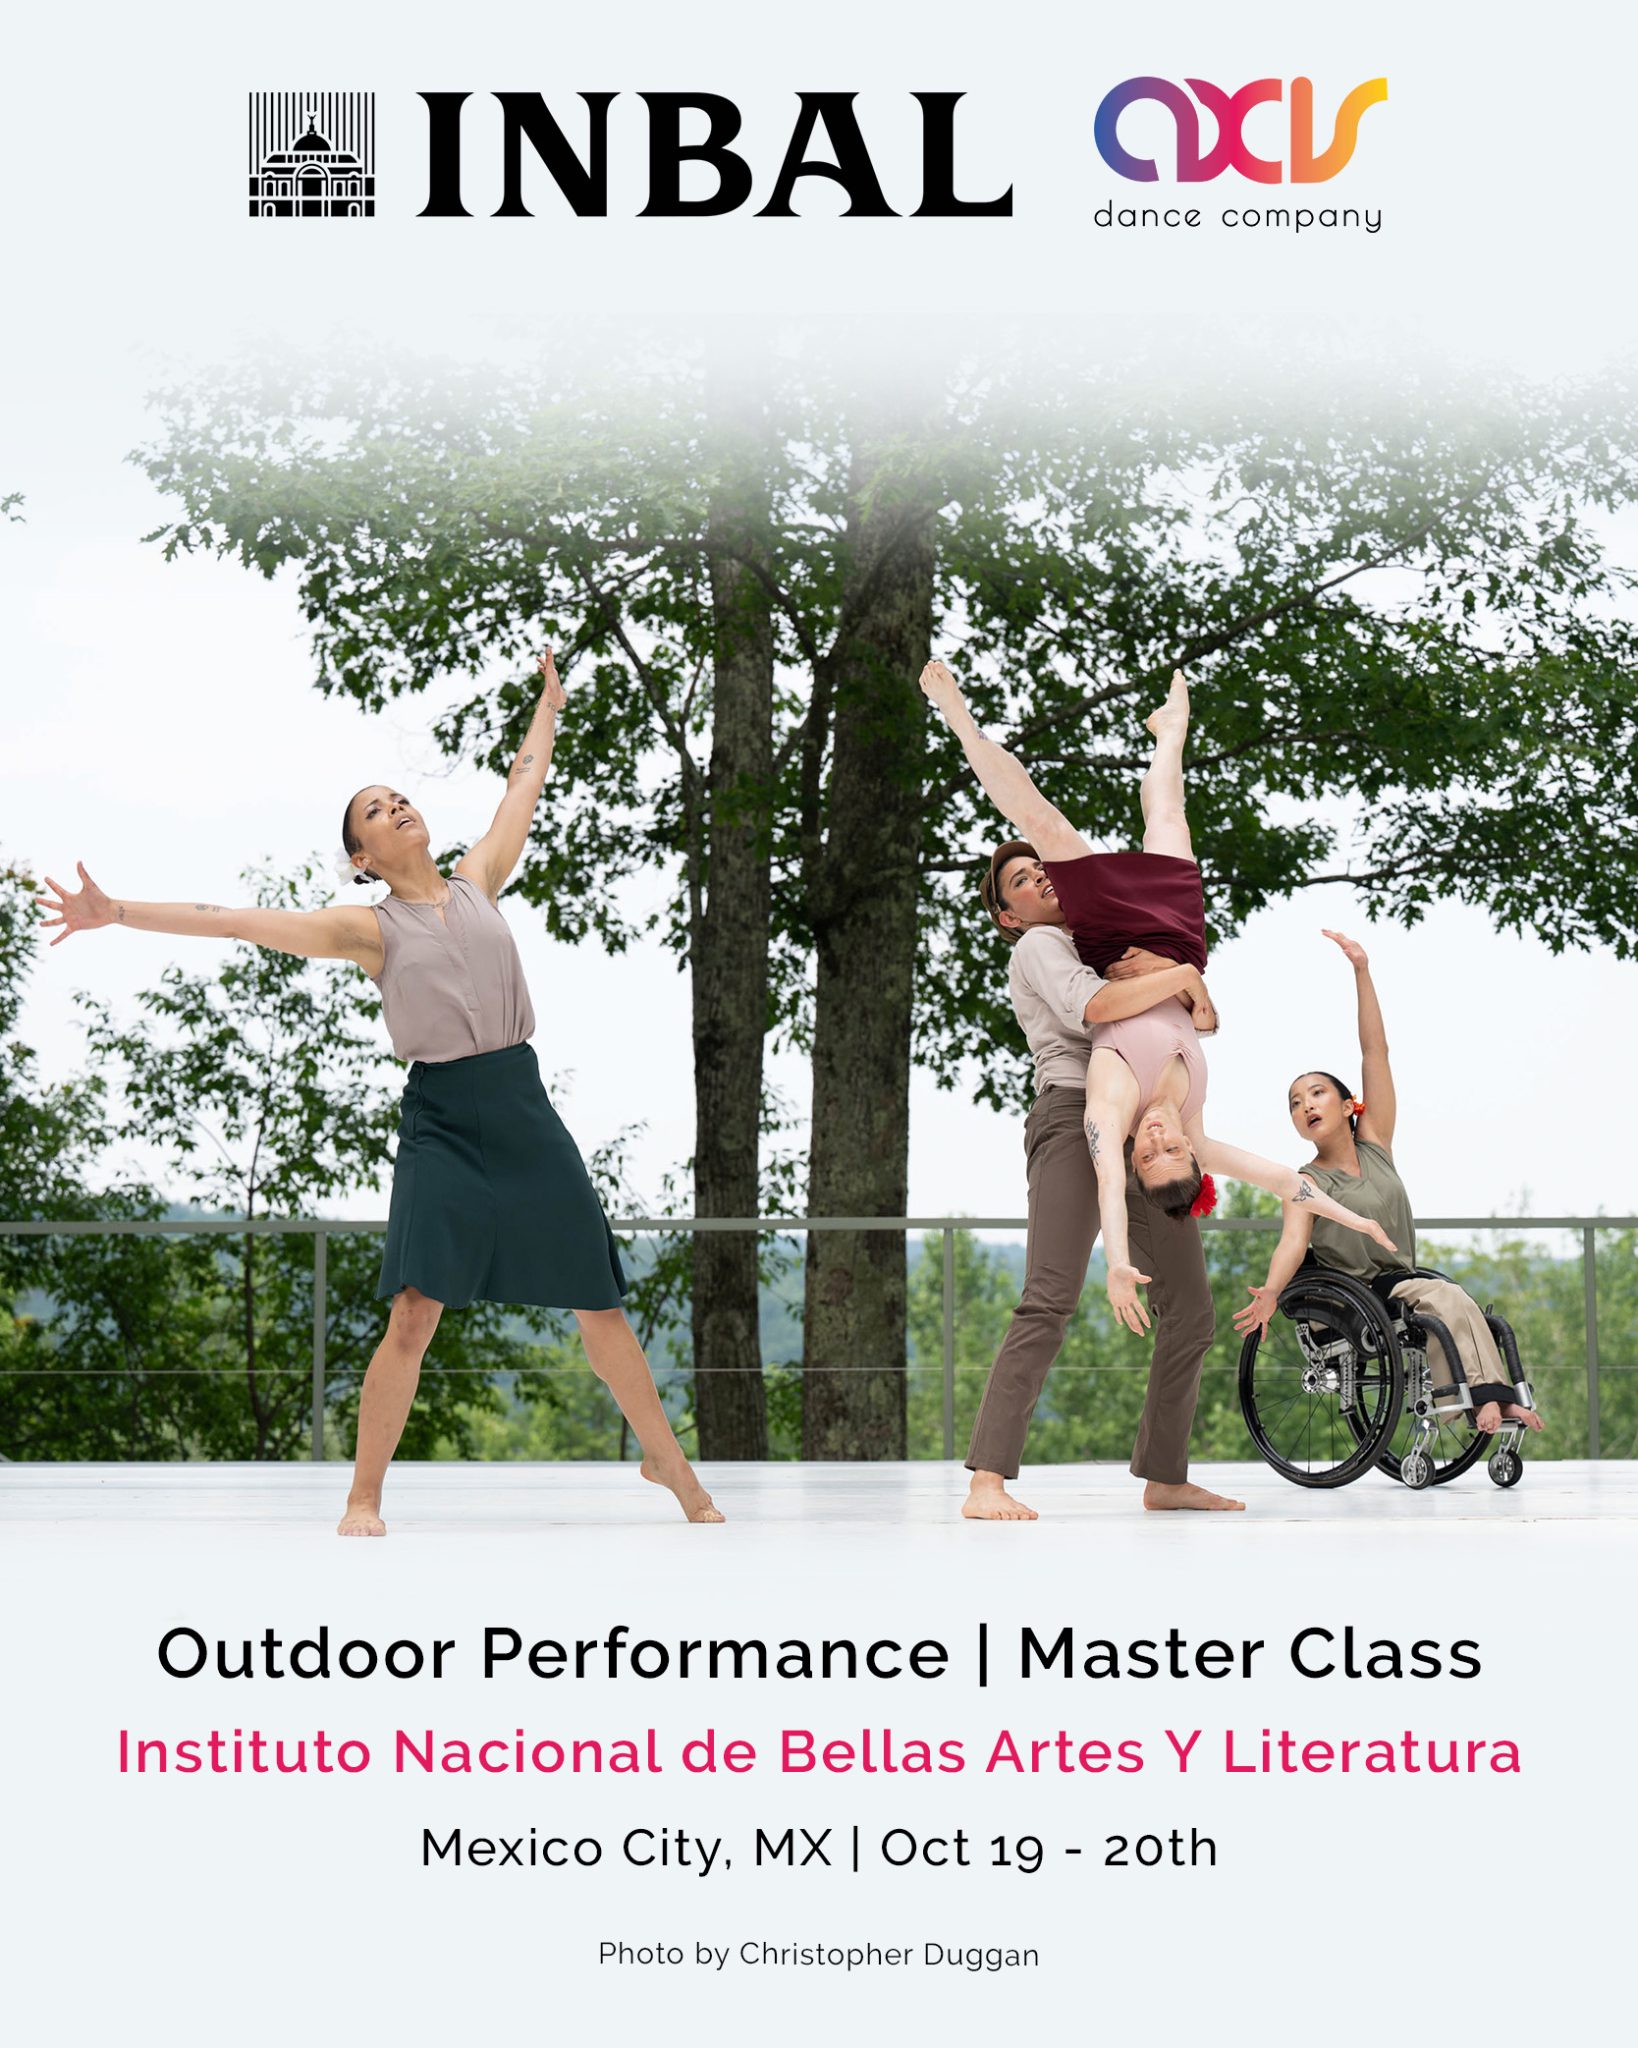 A diverse group of disabled and non-disabled dancers perform on a white outdoor stage, which opens up to a majestic background of trees, rolling hills and sky. Zara lifts Louisa upside down in a cartwheel motion, while Julie and Alaja follow this motion with their upper limbs. The dancers wear period costumes in shades of beige, green and maroon, with red and white flowers in their hair. The INBA and AXIS logos are placed next to text included in event description.